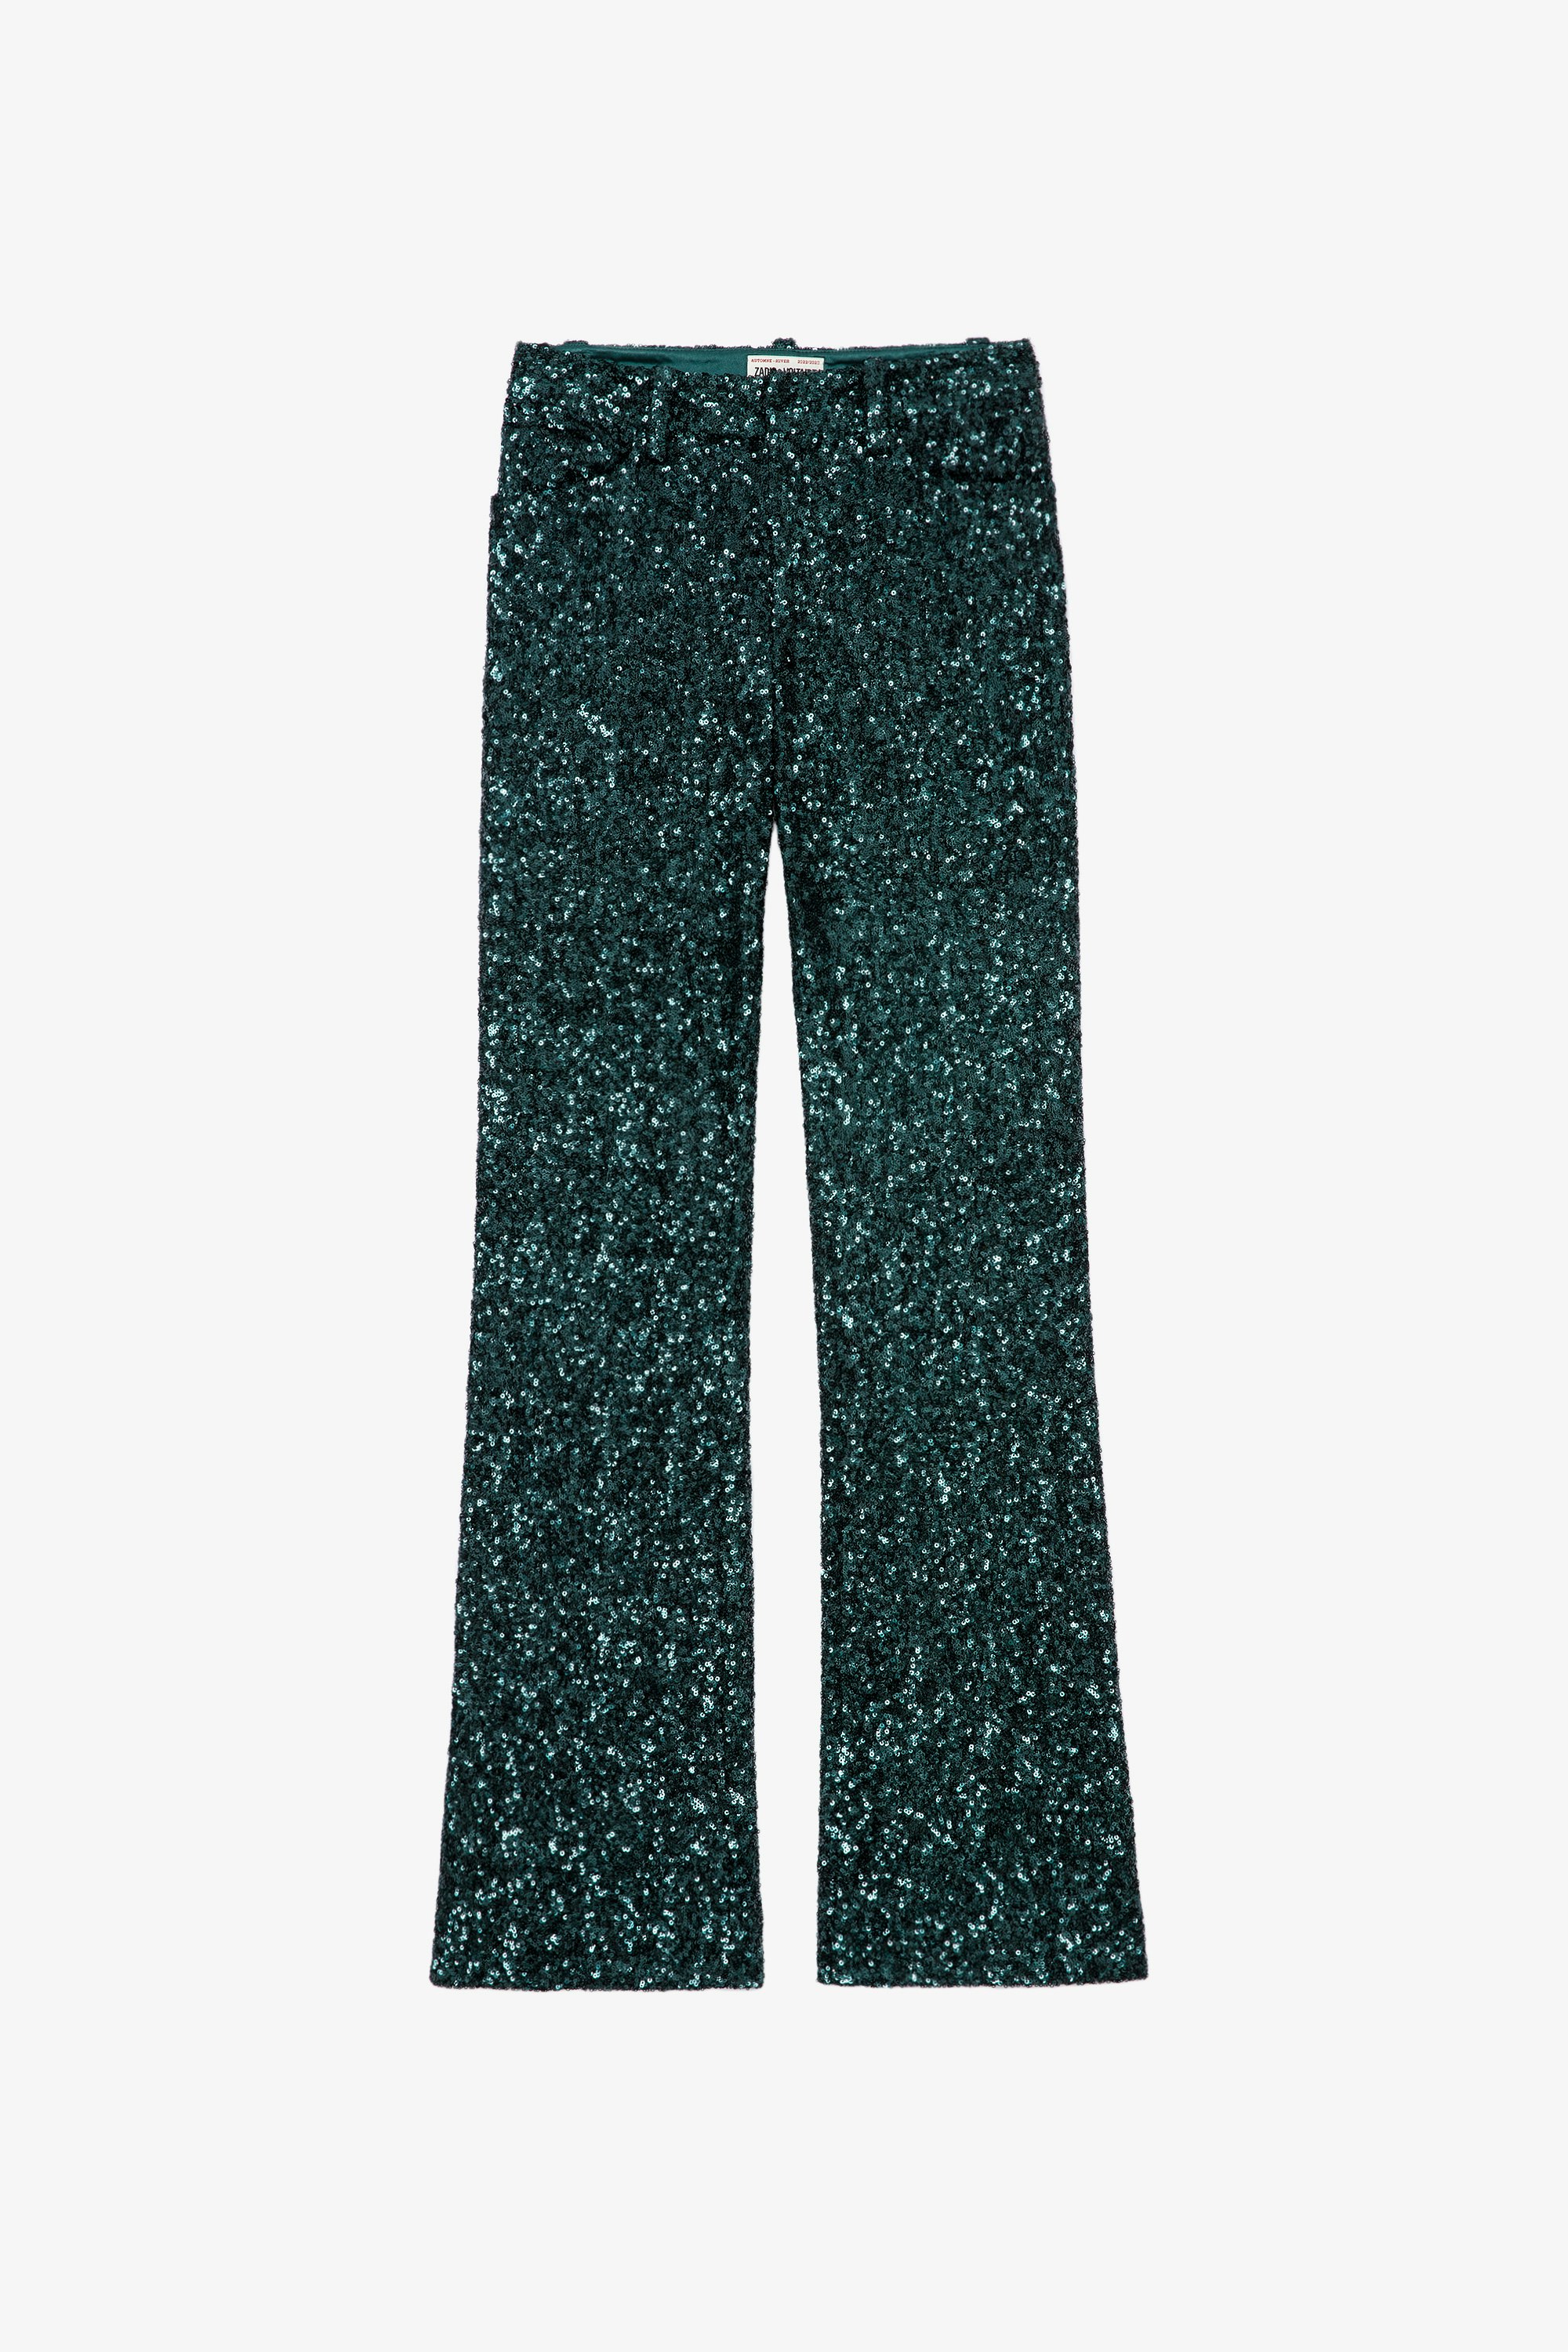 Pistol パンツ Women's tailored trousers with all-over green sequins